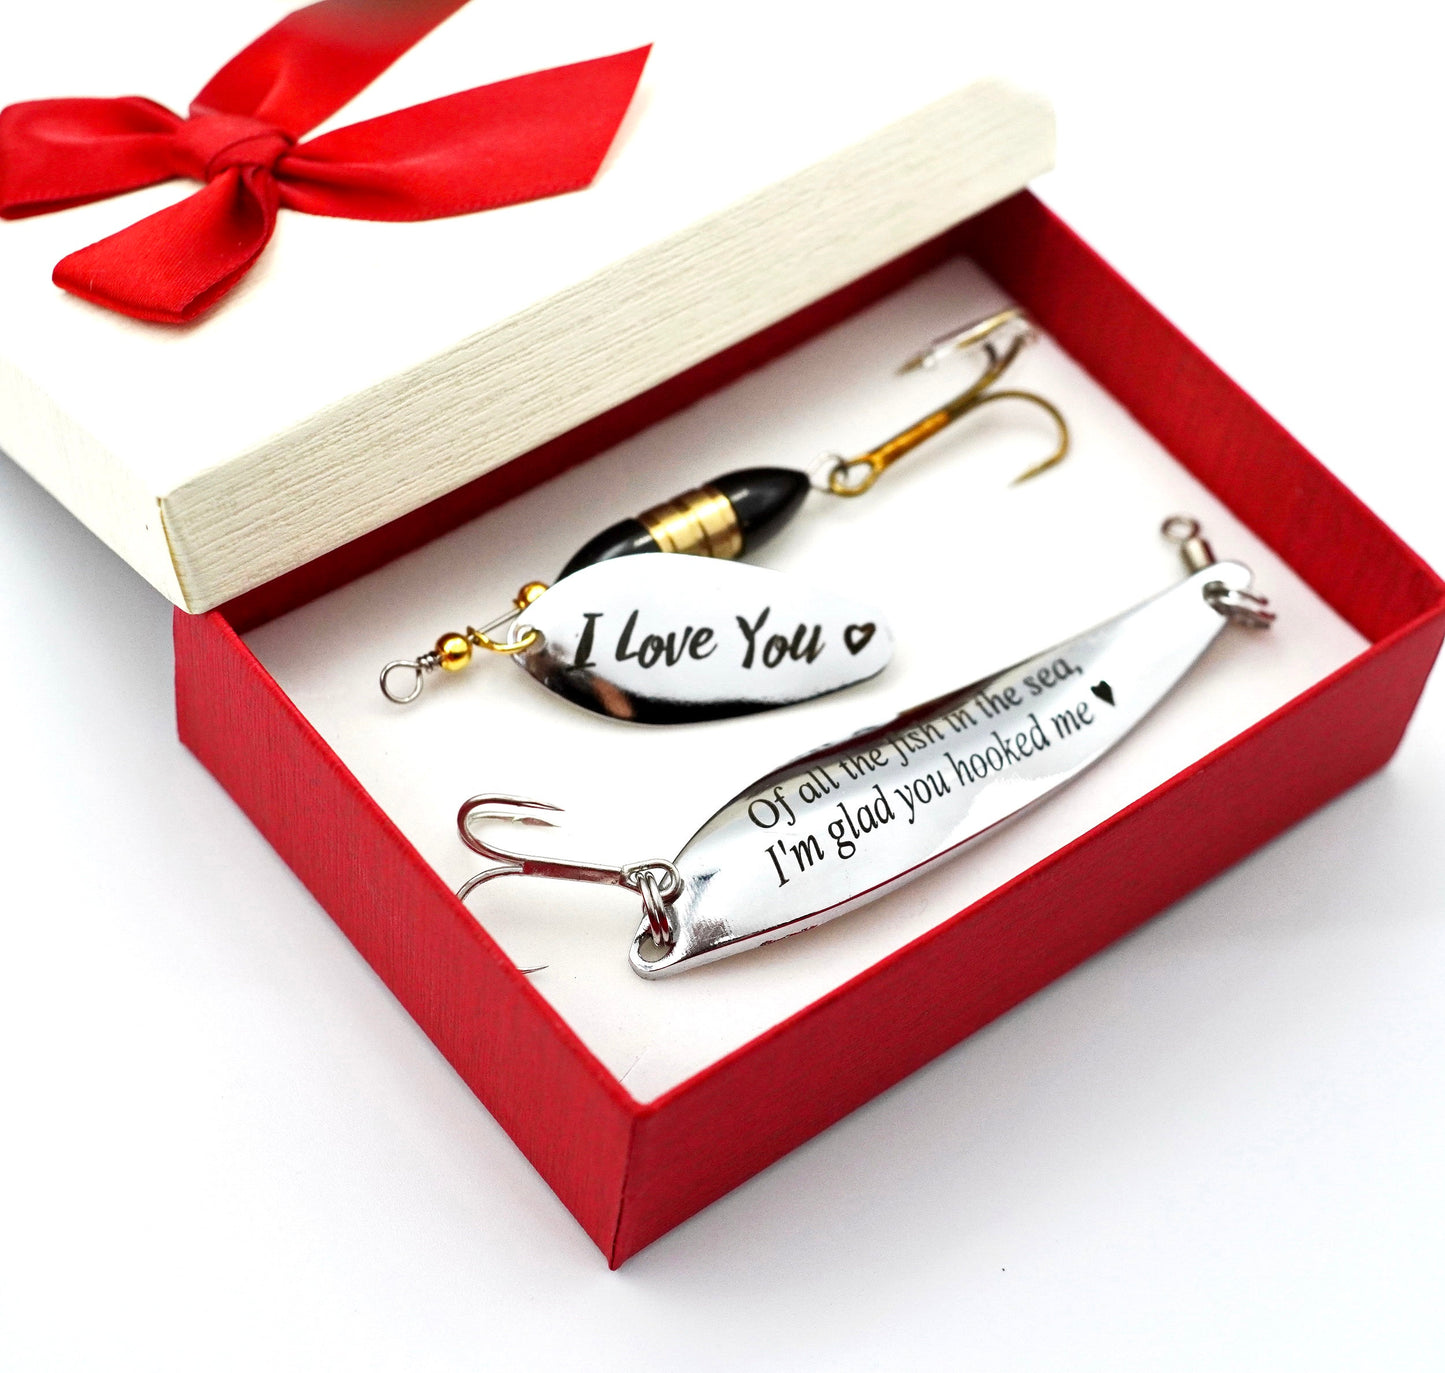 Fishing gift for man Personalized lure in gift box bait for